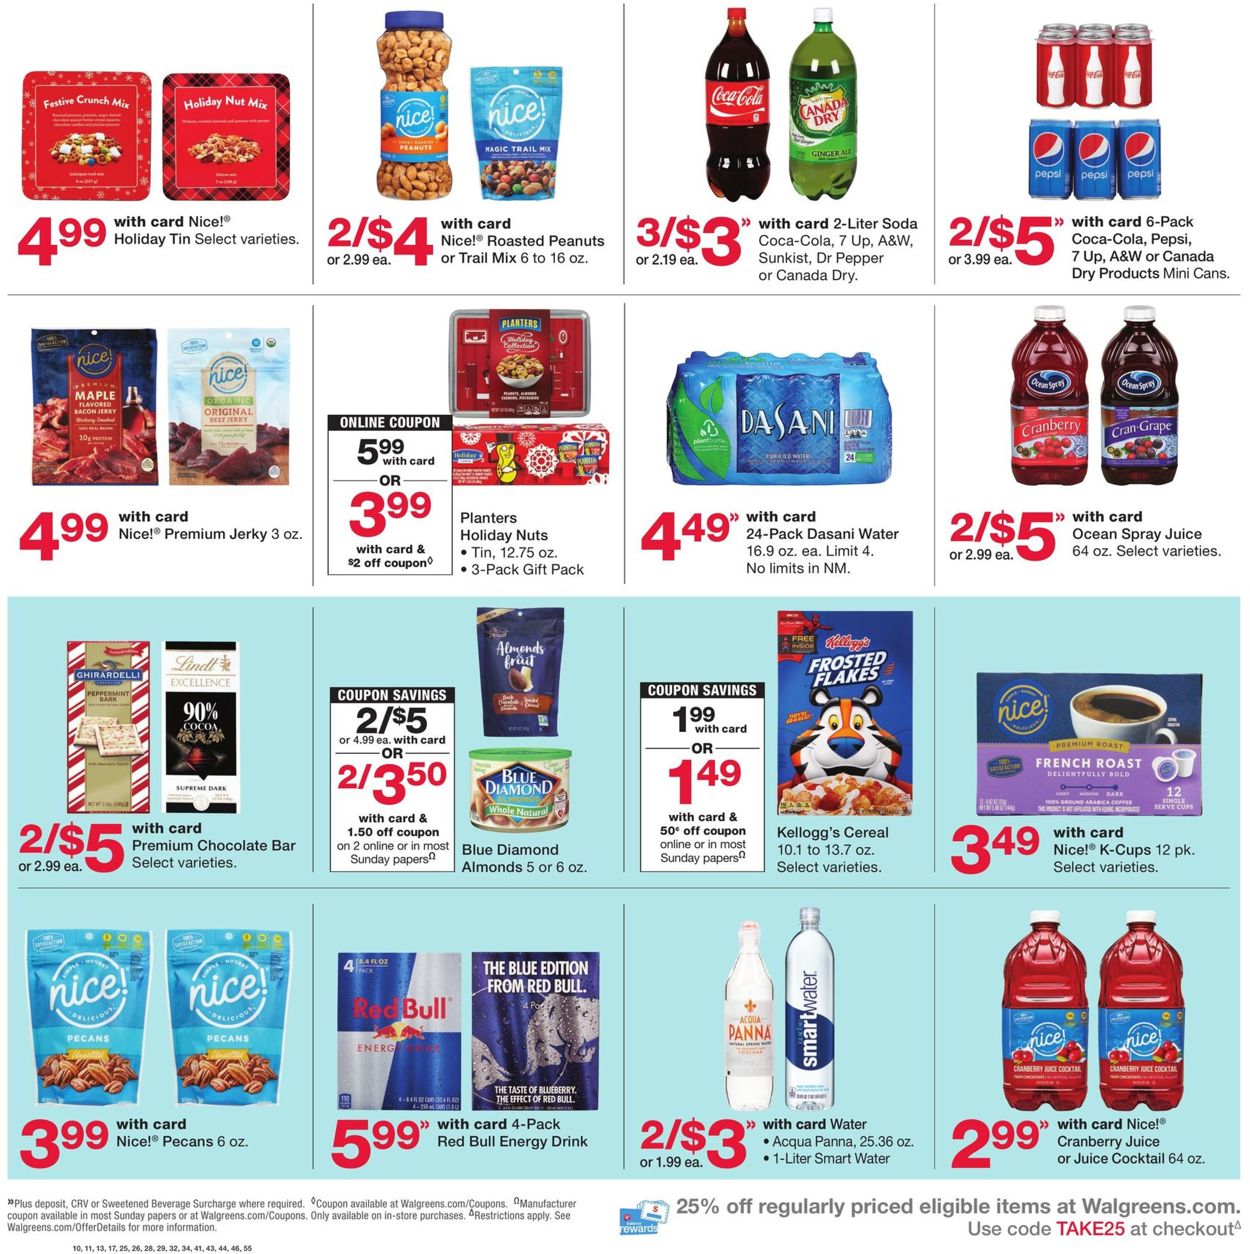 Walgreens Current weekly ad 11/24 - 11/30/2019 [6] - frequent-ads.com